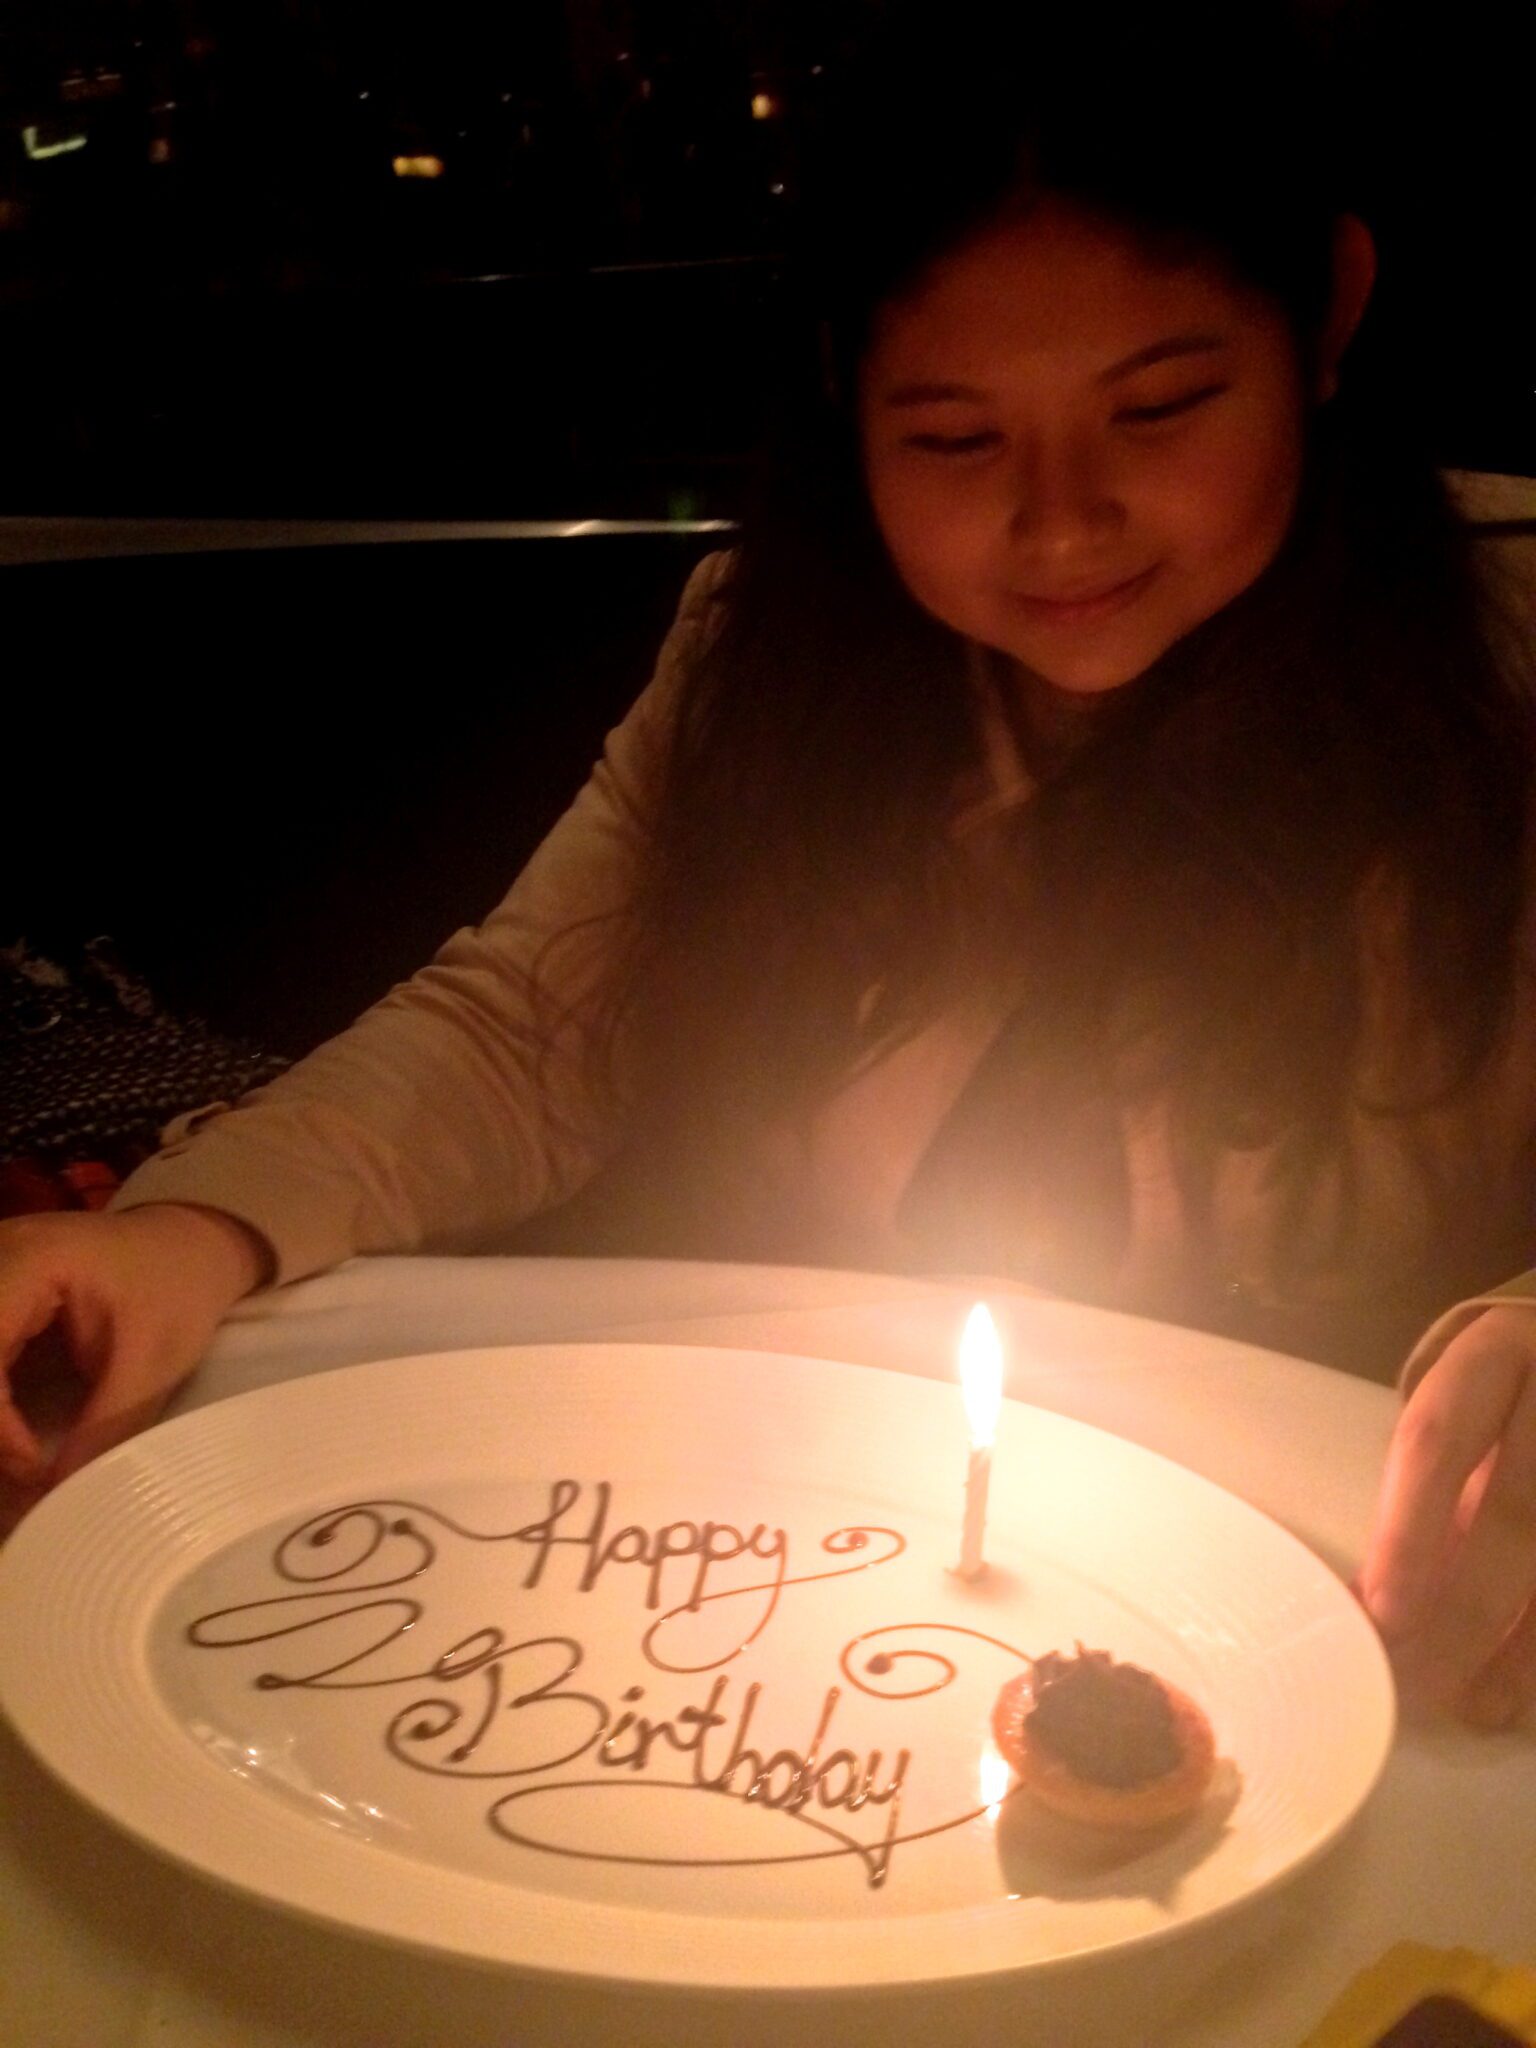 This is my favourite of all the photographs I've taken that night. Kat was very sweet and kind in spending some of the birthday gift her Dad had given her to pay for the meal. Thank you again, Kat. Happy birthday. Love you and miss you a lot.